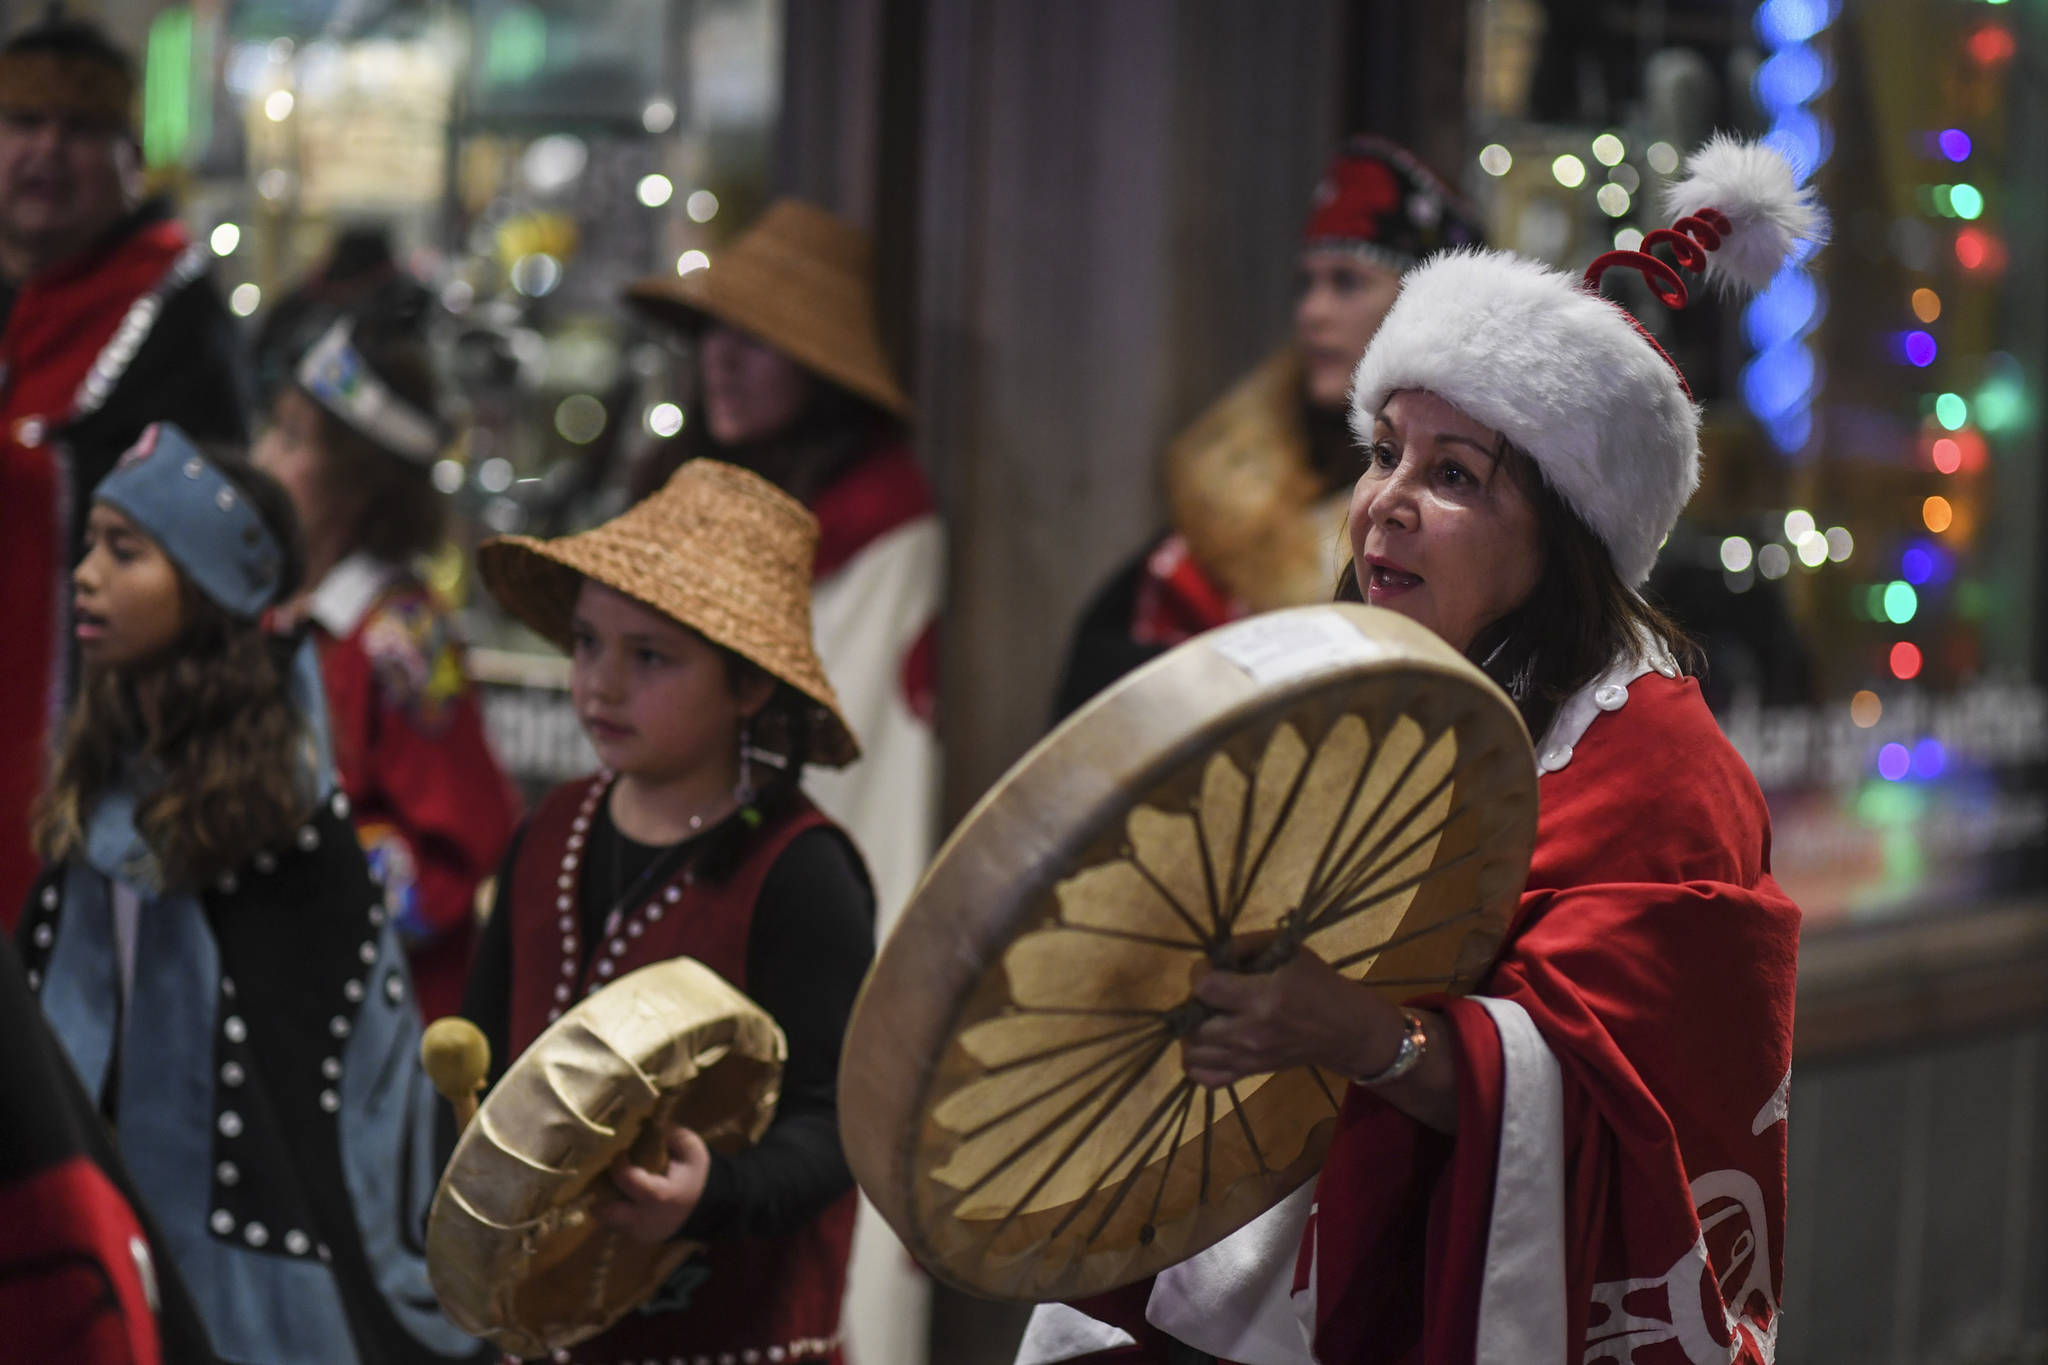 Nancy Barnes leads the Yees ku.oo Dancers in a song on Front Street during Gallery Walk on Friday, Dec. 6, 2019. (Michael Penn | Juneau Empire)